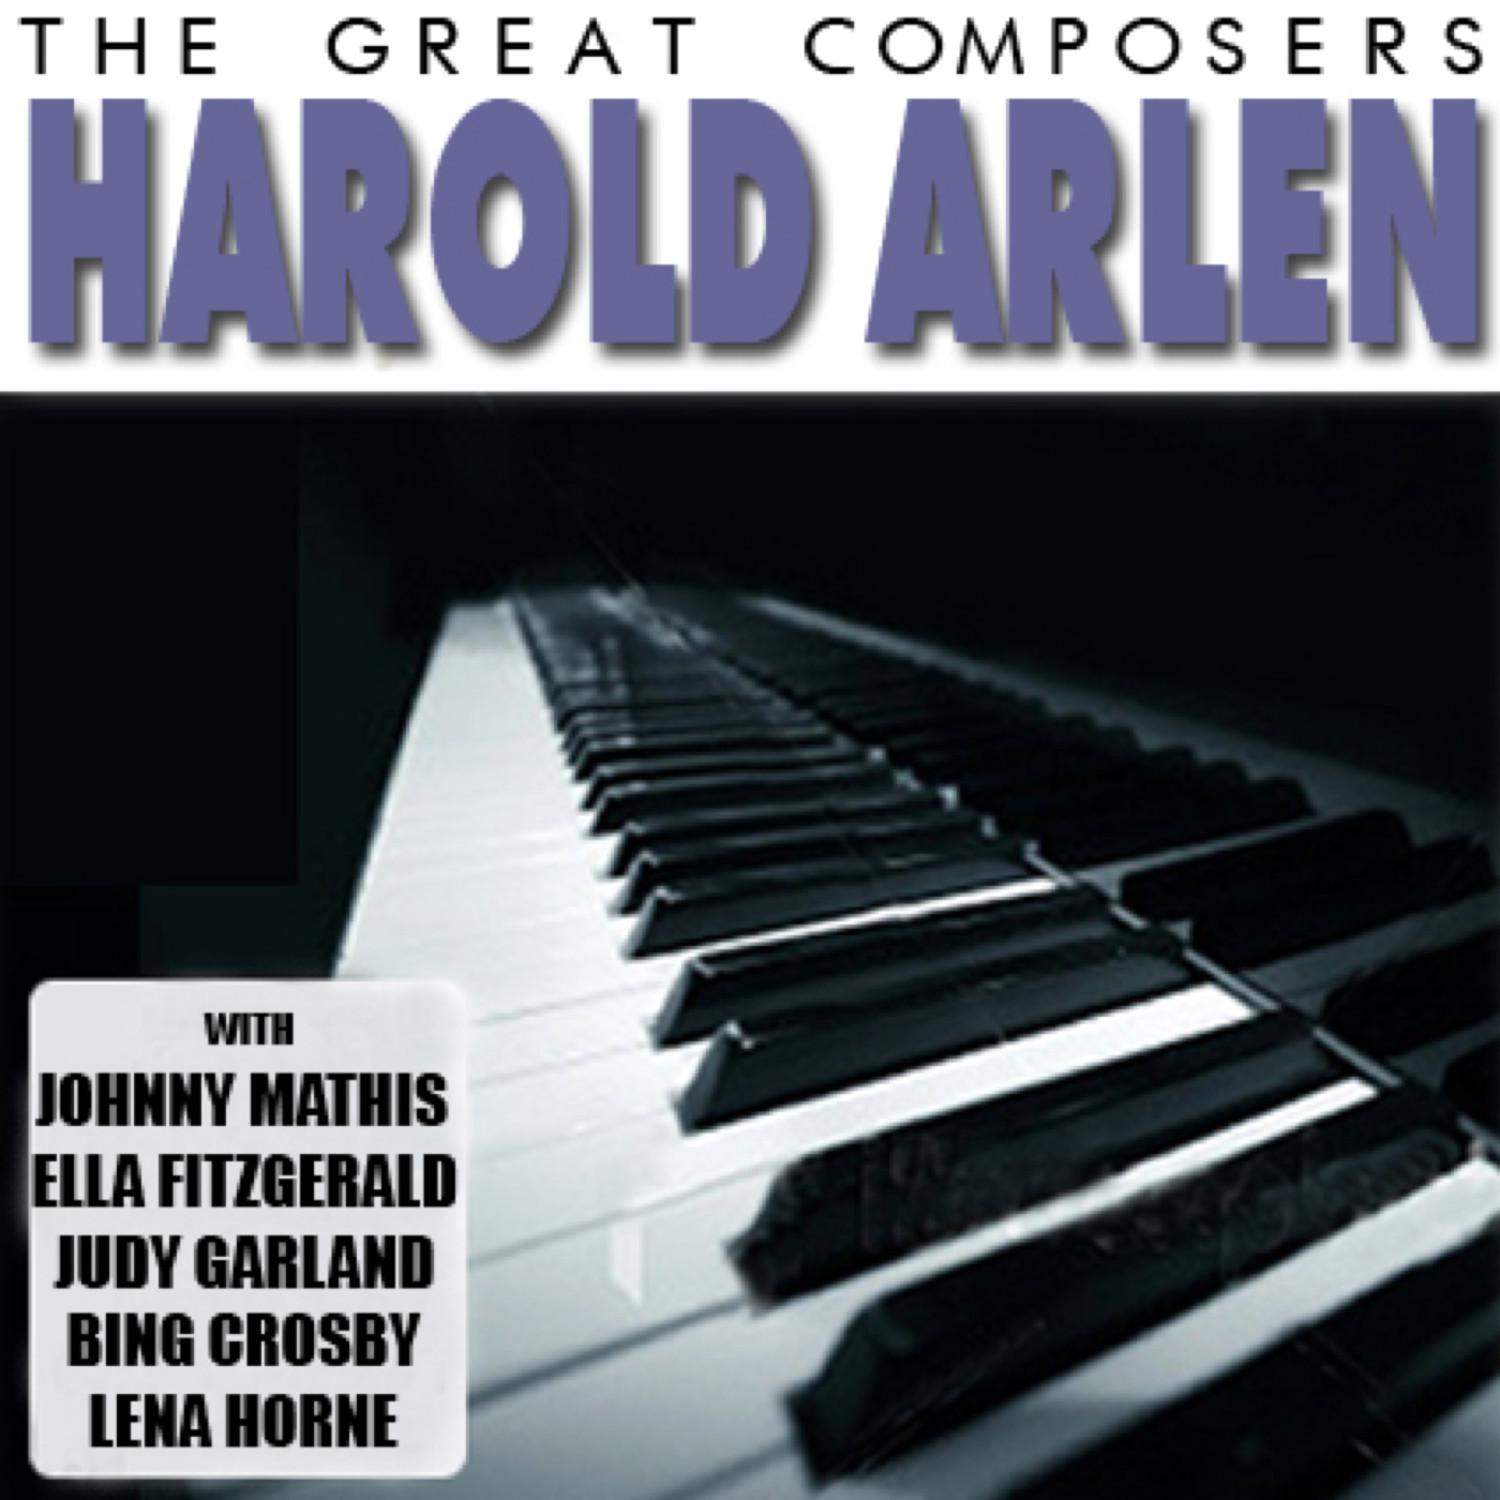 The Great Composers - Harold Arlen